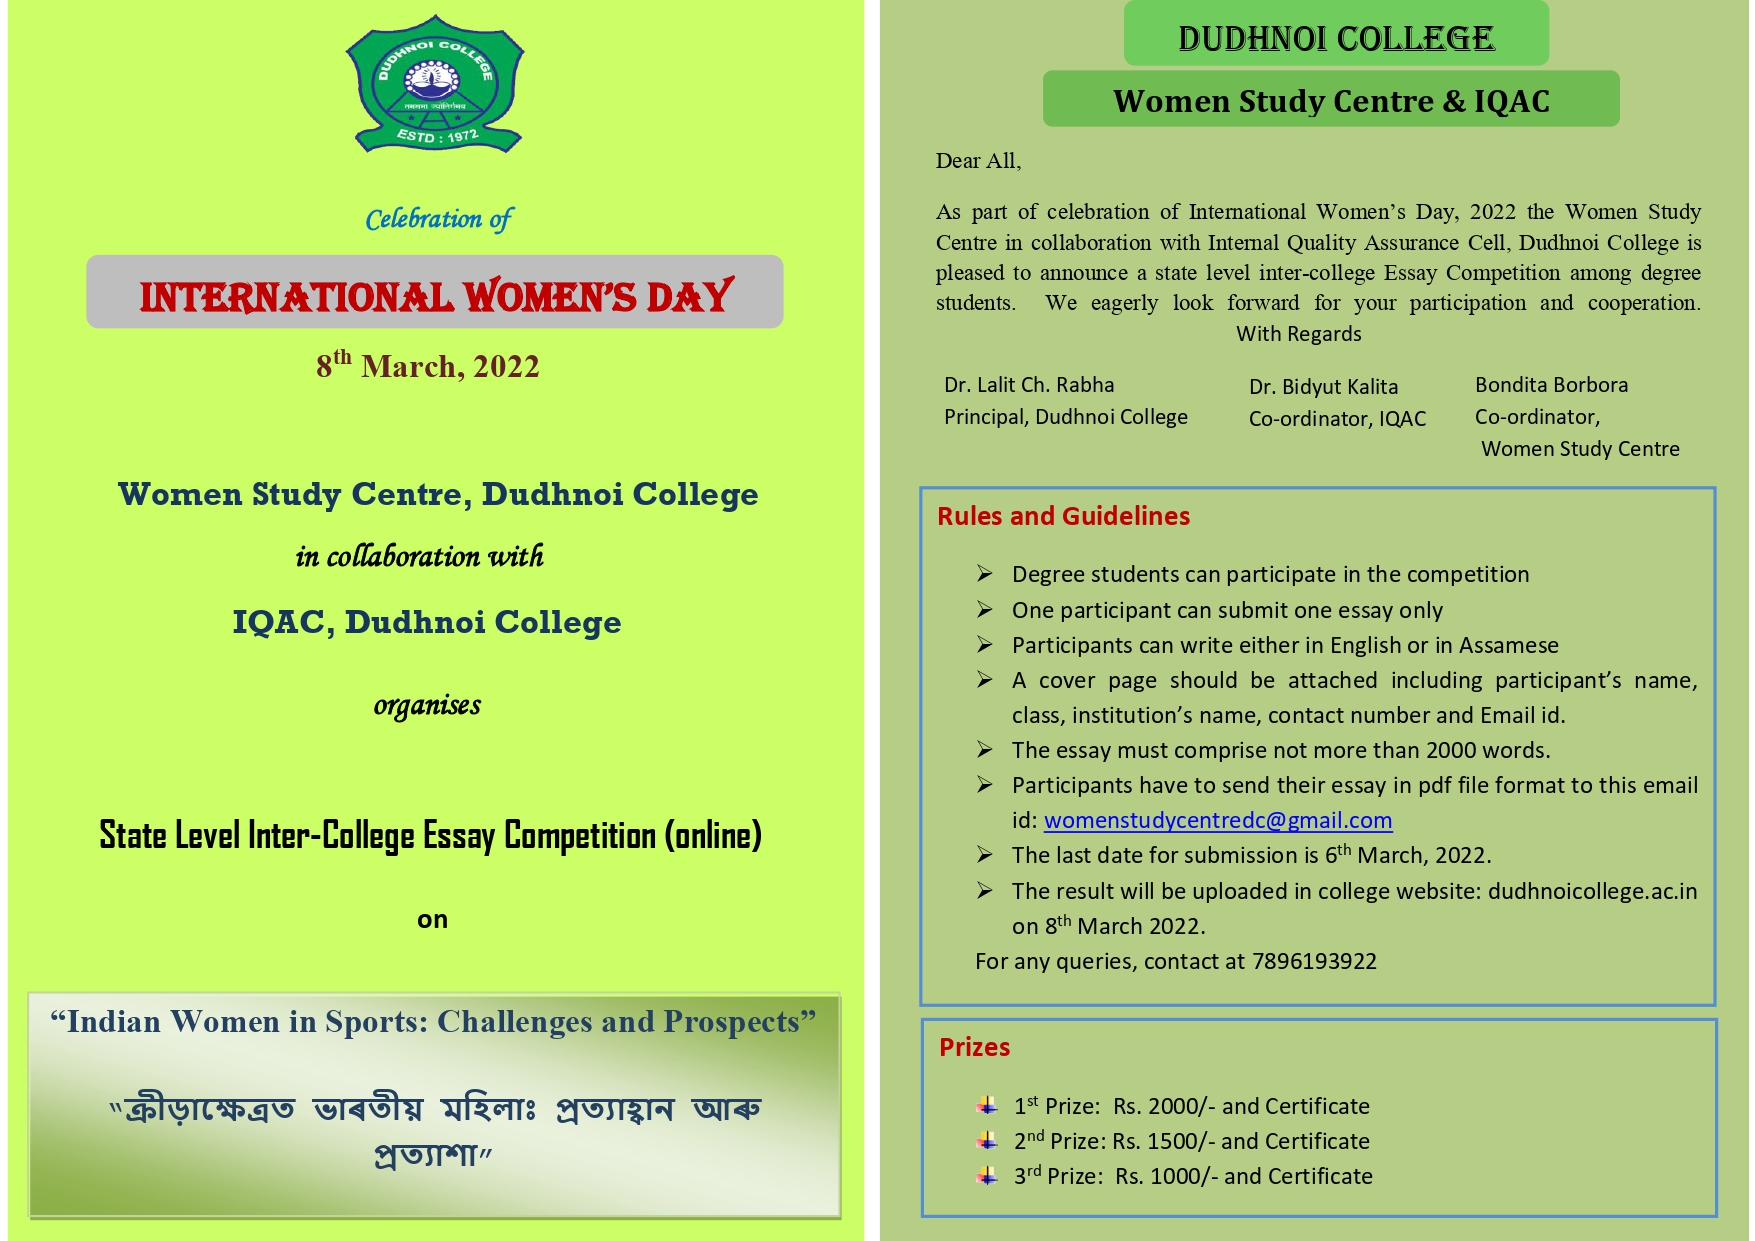 Dudhnoi College events